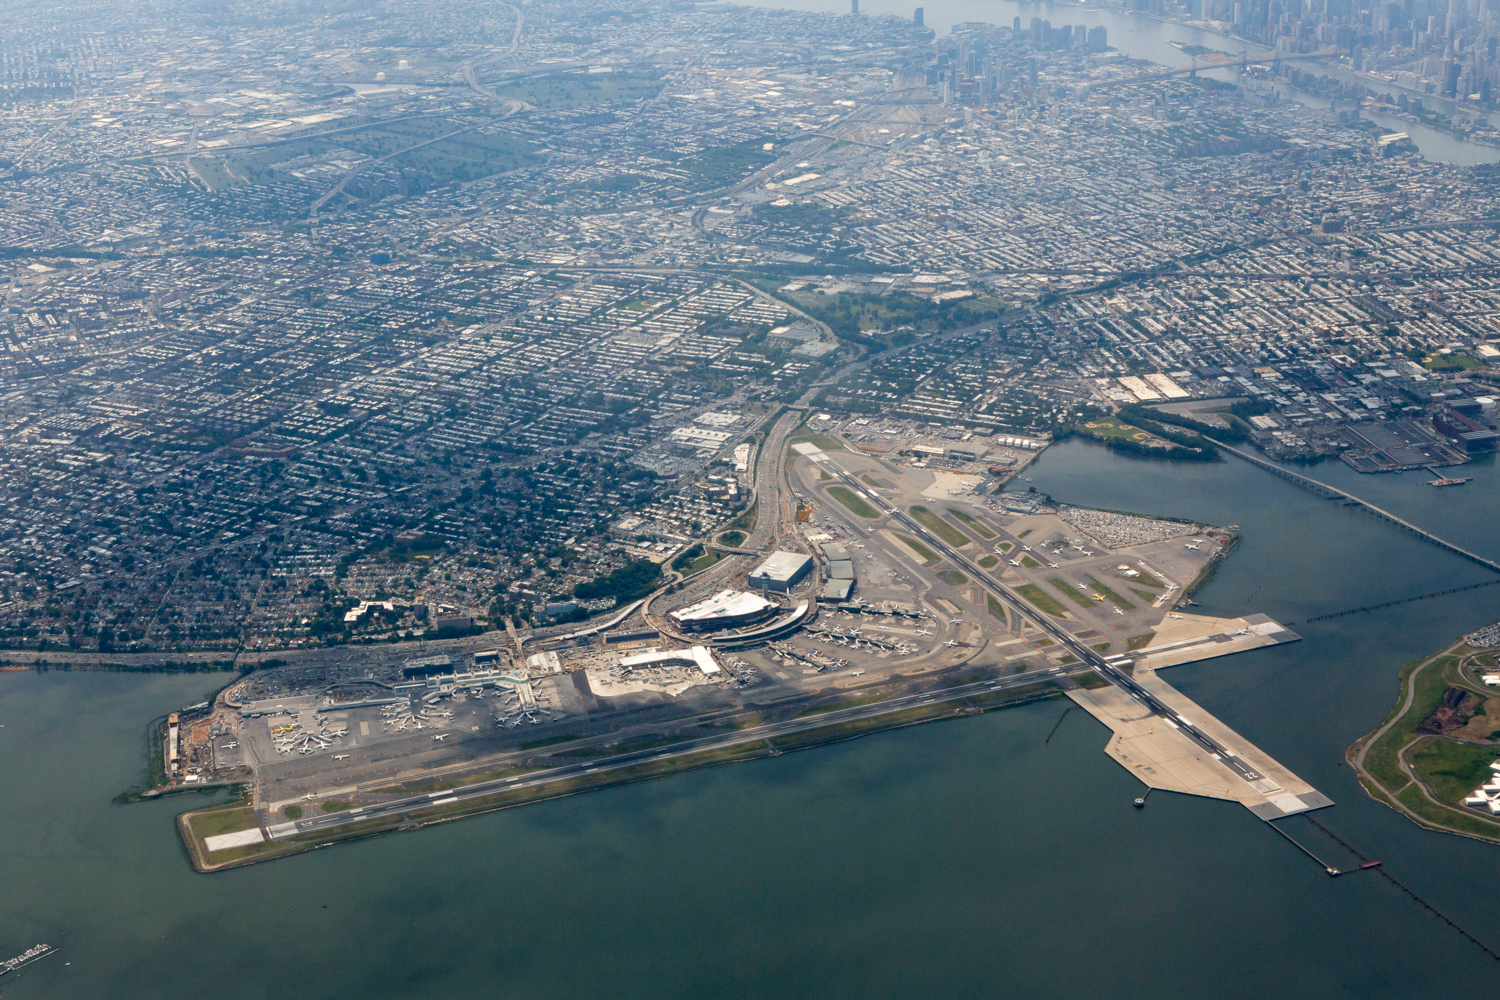 LaGuardia from the sky, taken July 12th, image by Andrew Campbell Nelson